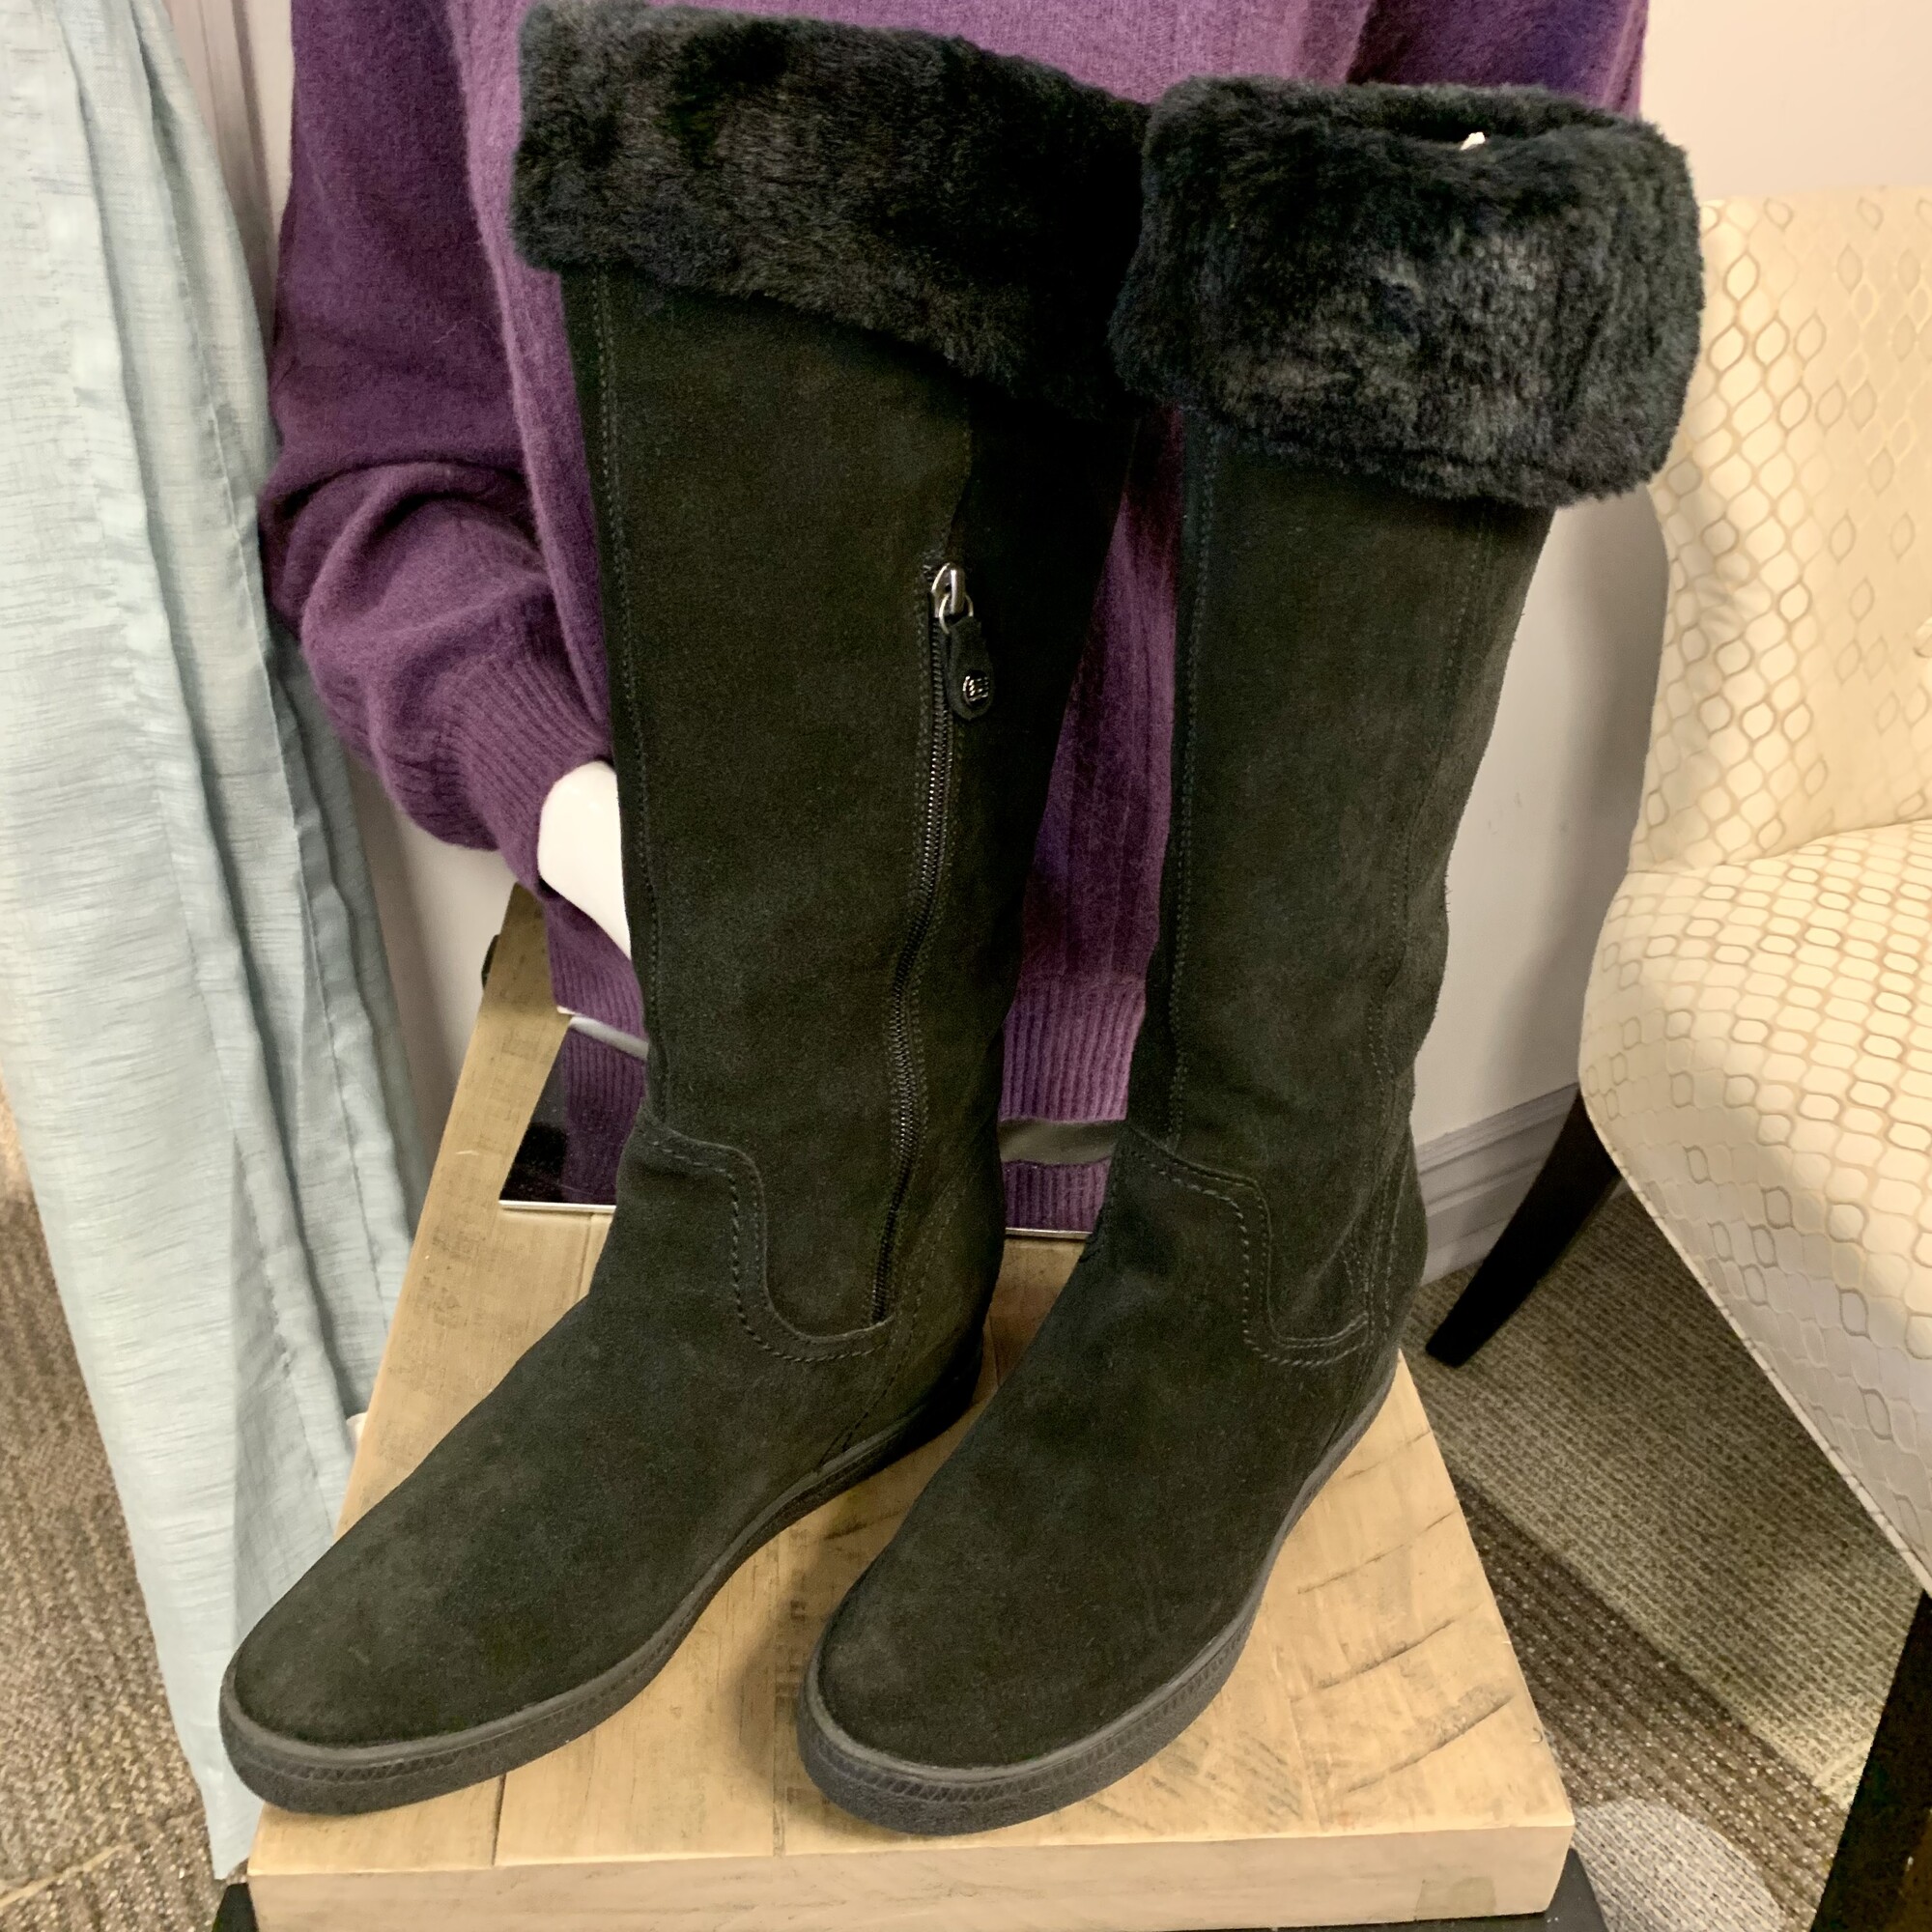 Geox Respira Tall Boots,
Colour: Black Suede,
Size: 9 / 10,
With inside - hidden - wedge
Calf: 18\"
made in Marocco,

Please contact the store if you want this item shipped.